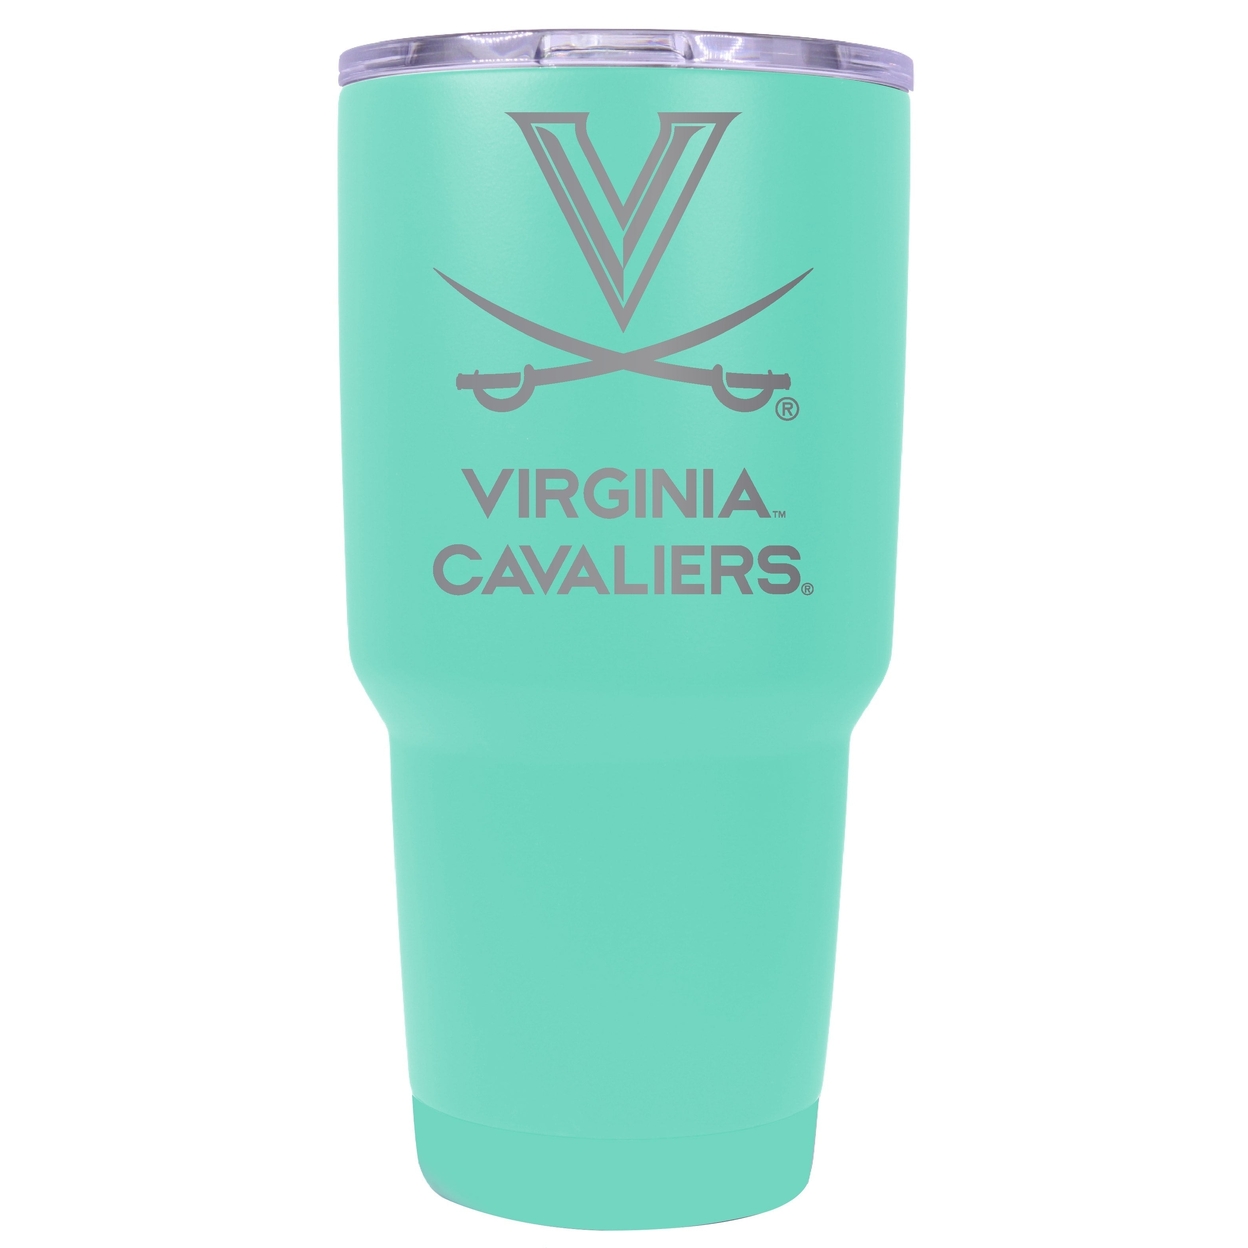 University Of Wyoming 24 Oz Laser Engraved Stainless Steel Insulated Tumbler - Choose Your Color. - Seafoam